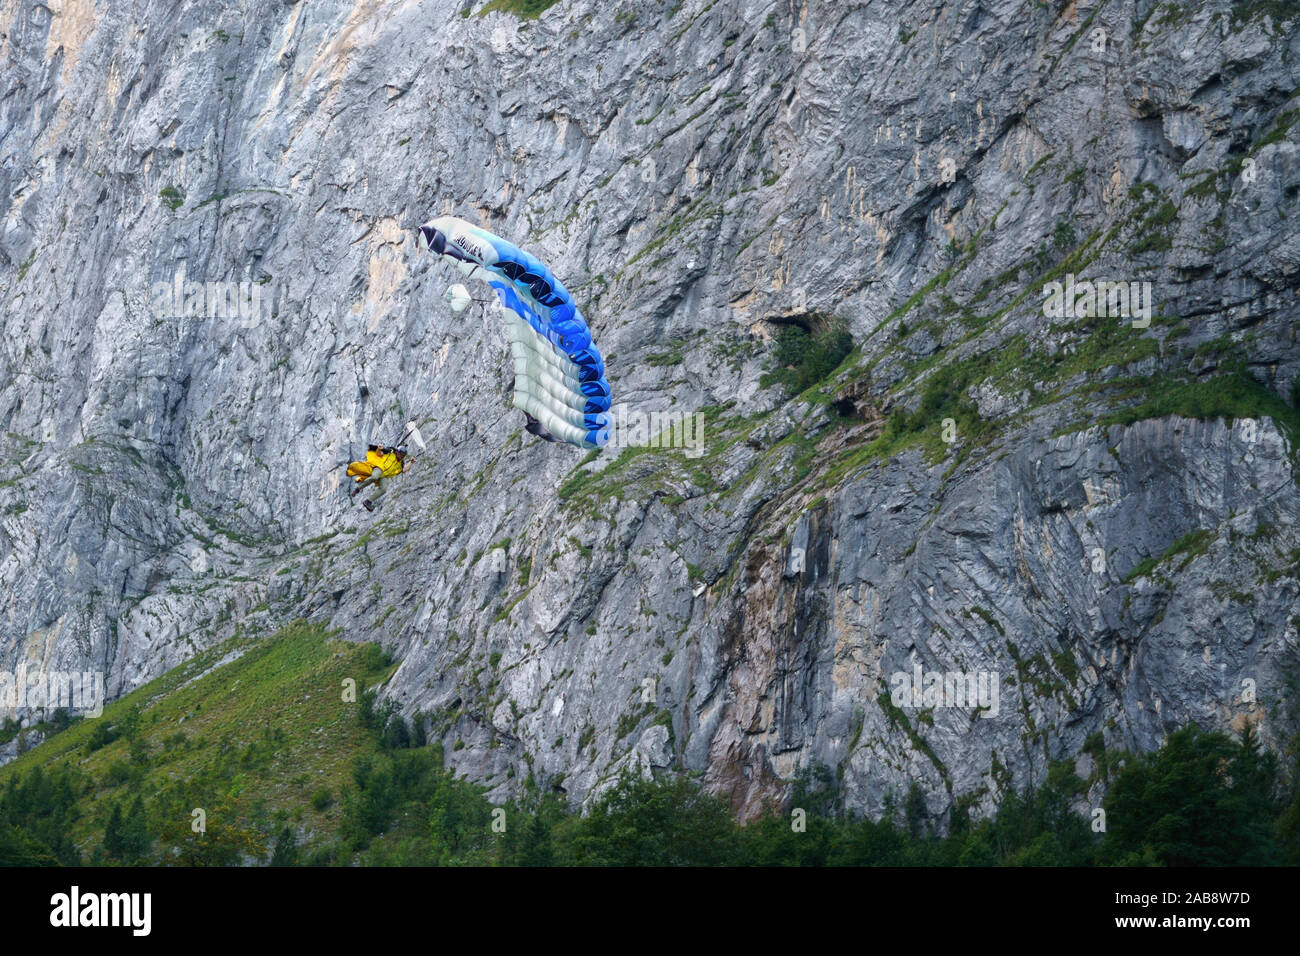 BASE jump in the Swiss village Lauterbrunnen, canton of Bern, Switzerland. Lauterbrunnen with its spectacular cliffs is a mecca for wingsuit flying. Stock Photo